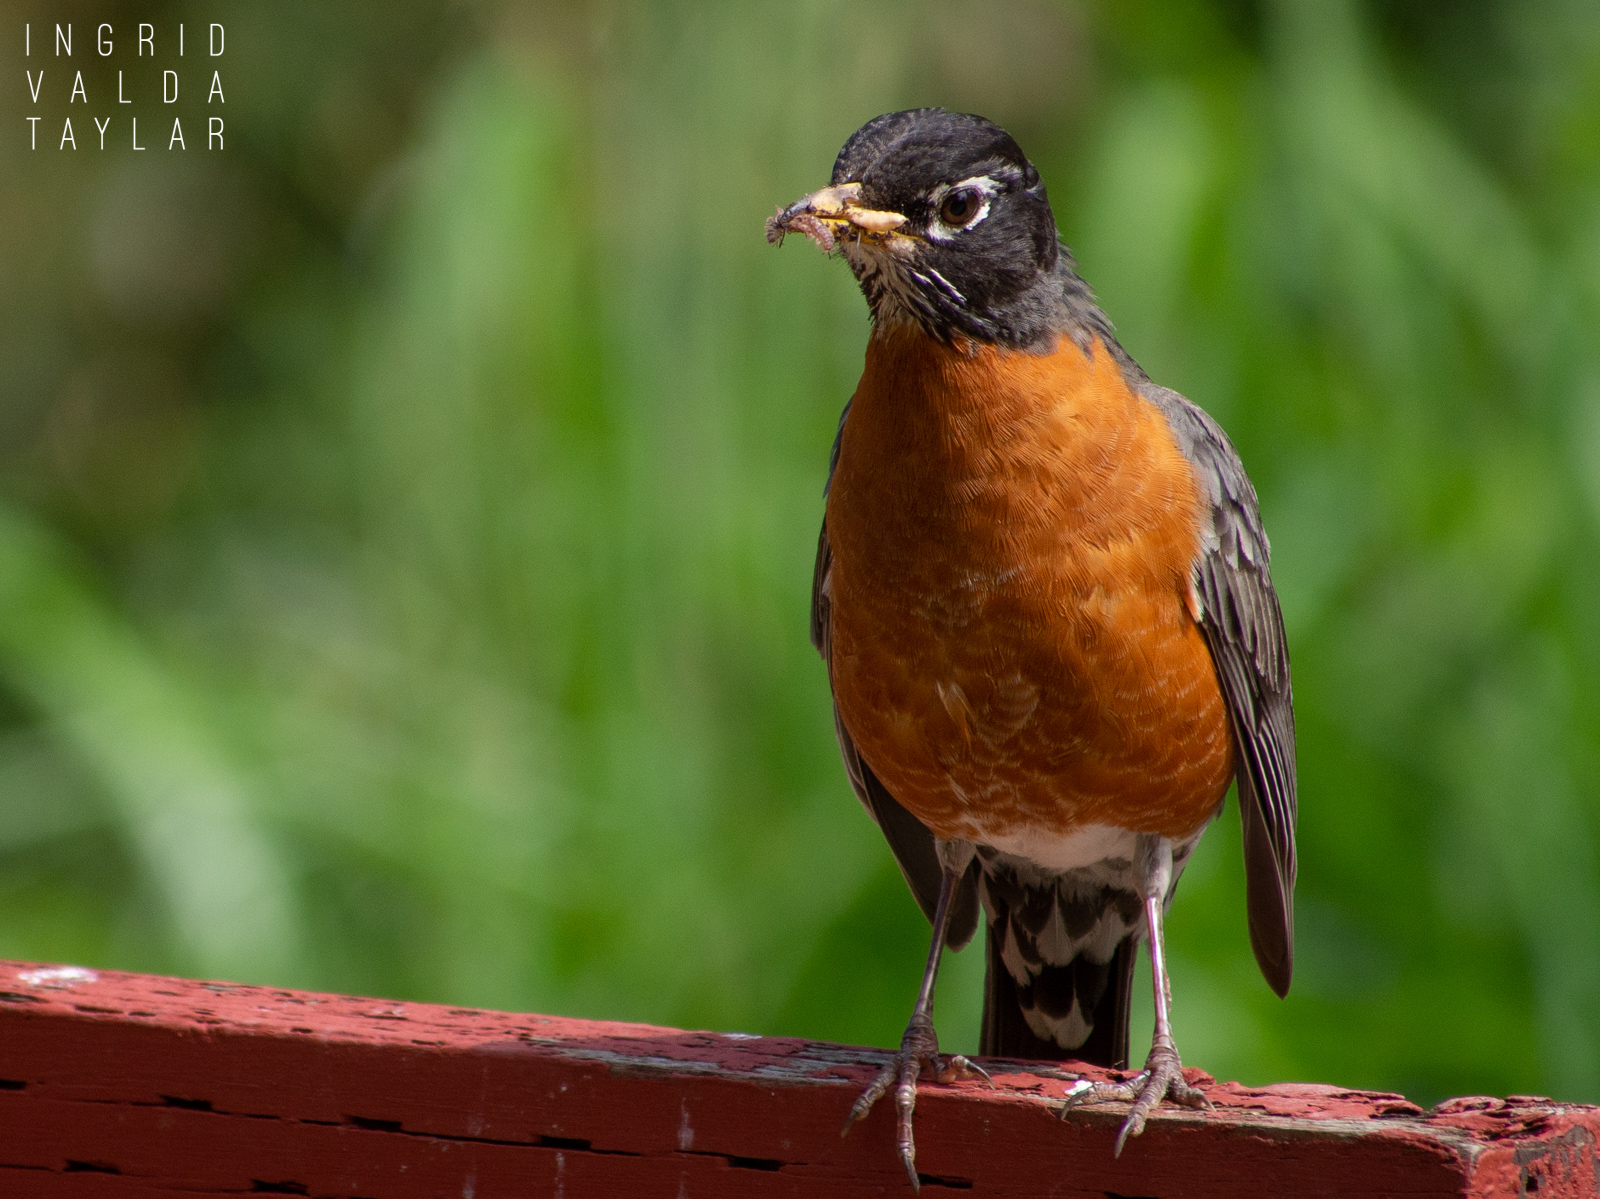 American Robin with Insect Meal